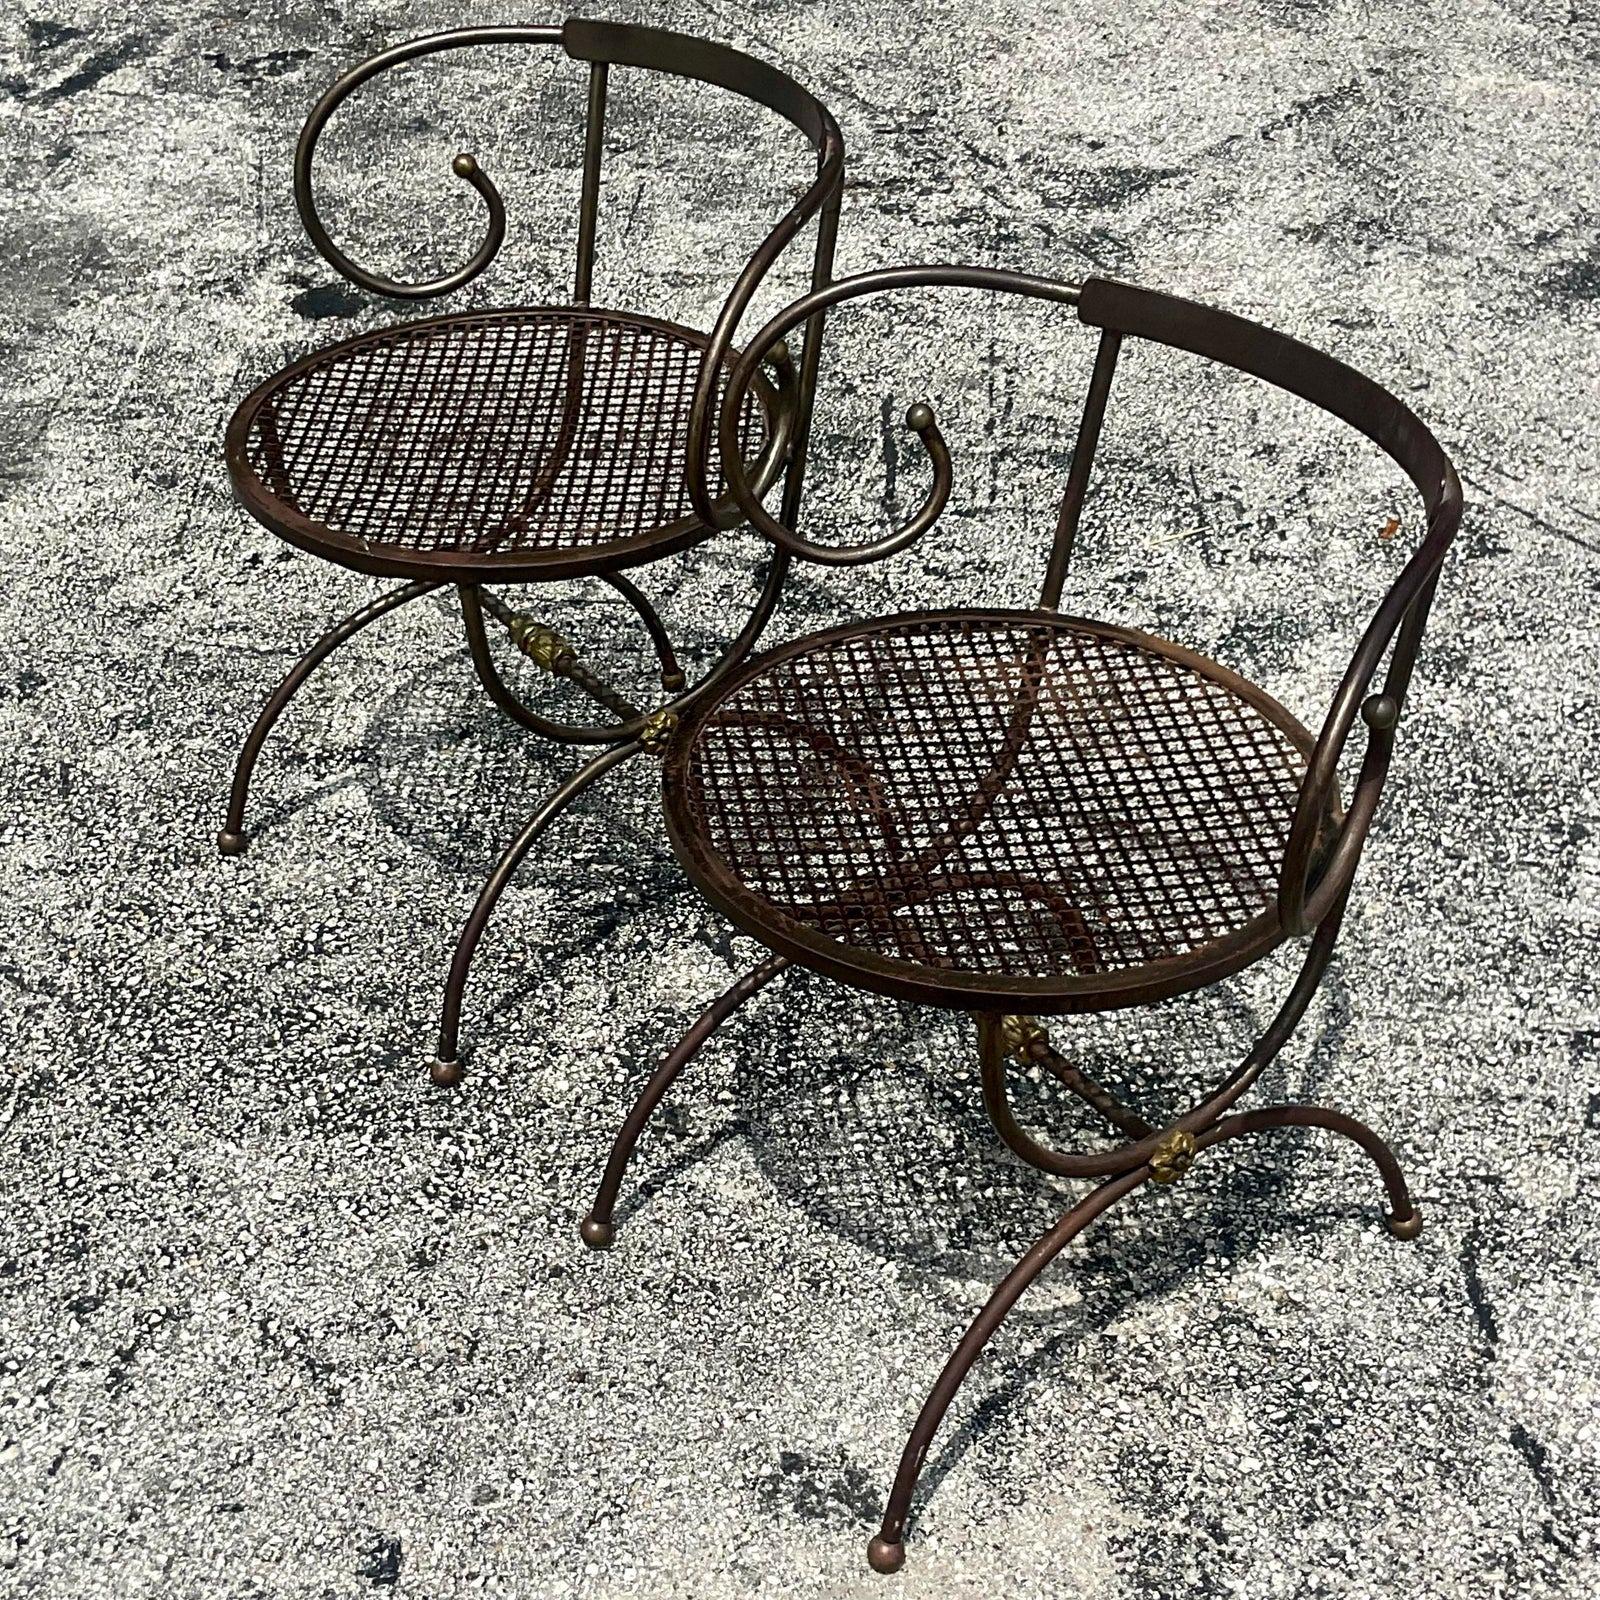 Vintage Boho Swirl Wrought Iron Accent Chairs - a Pair For Sale 1